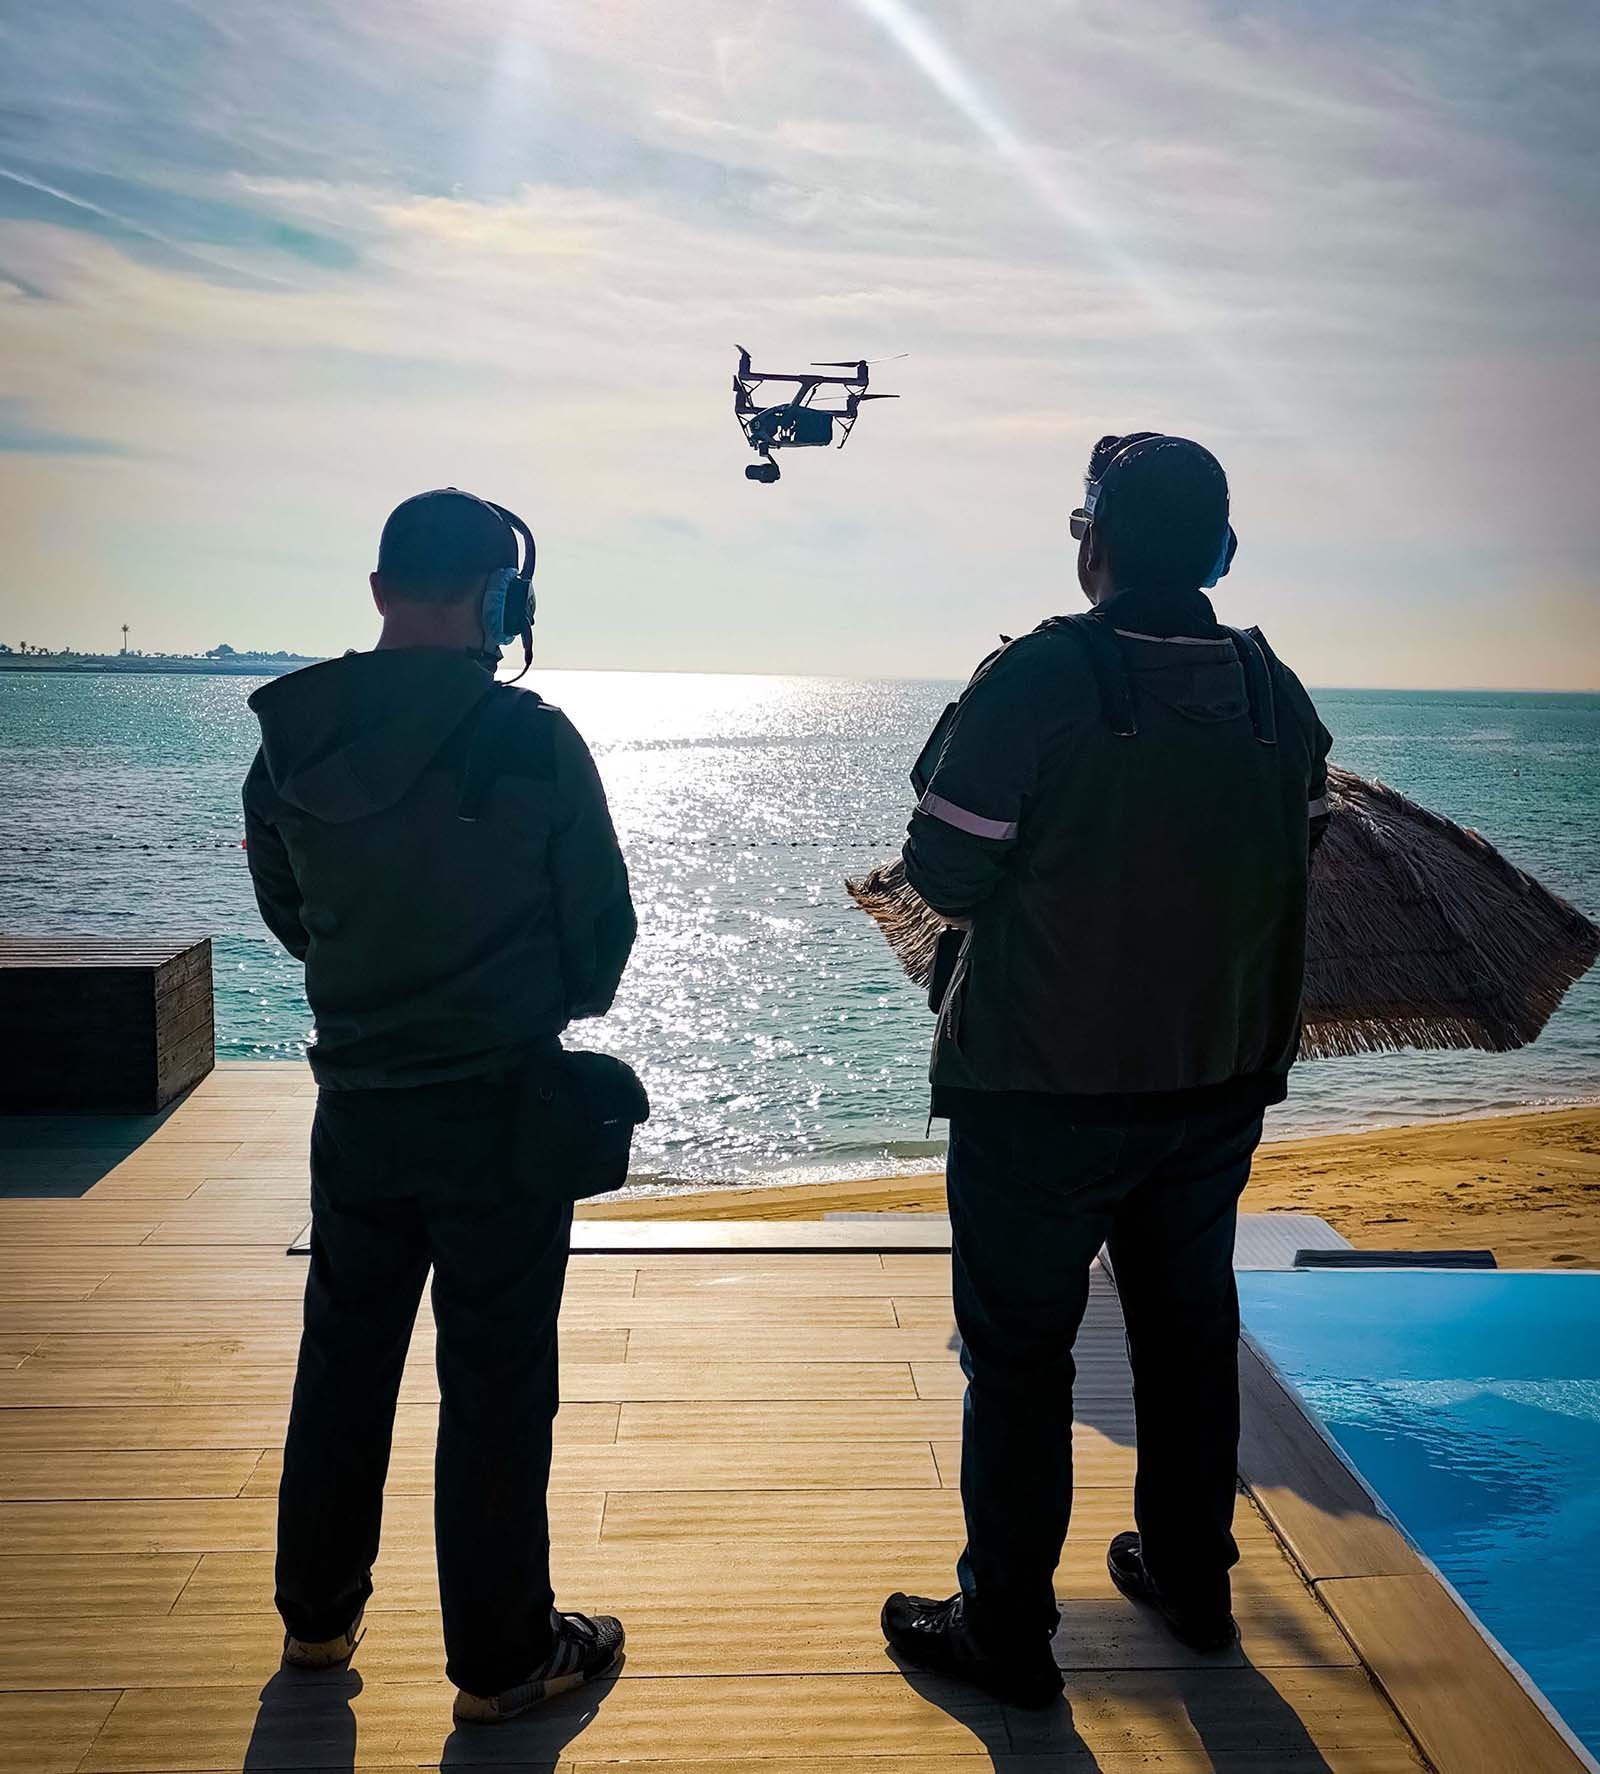  Two drone operators with control panels overseeing a shoot on the beach, coordinating aerial filming operations. 